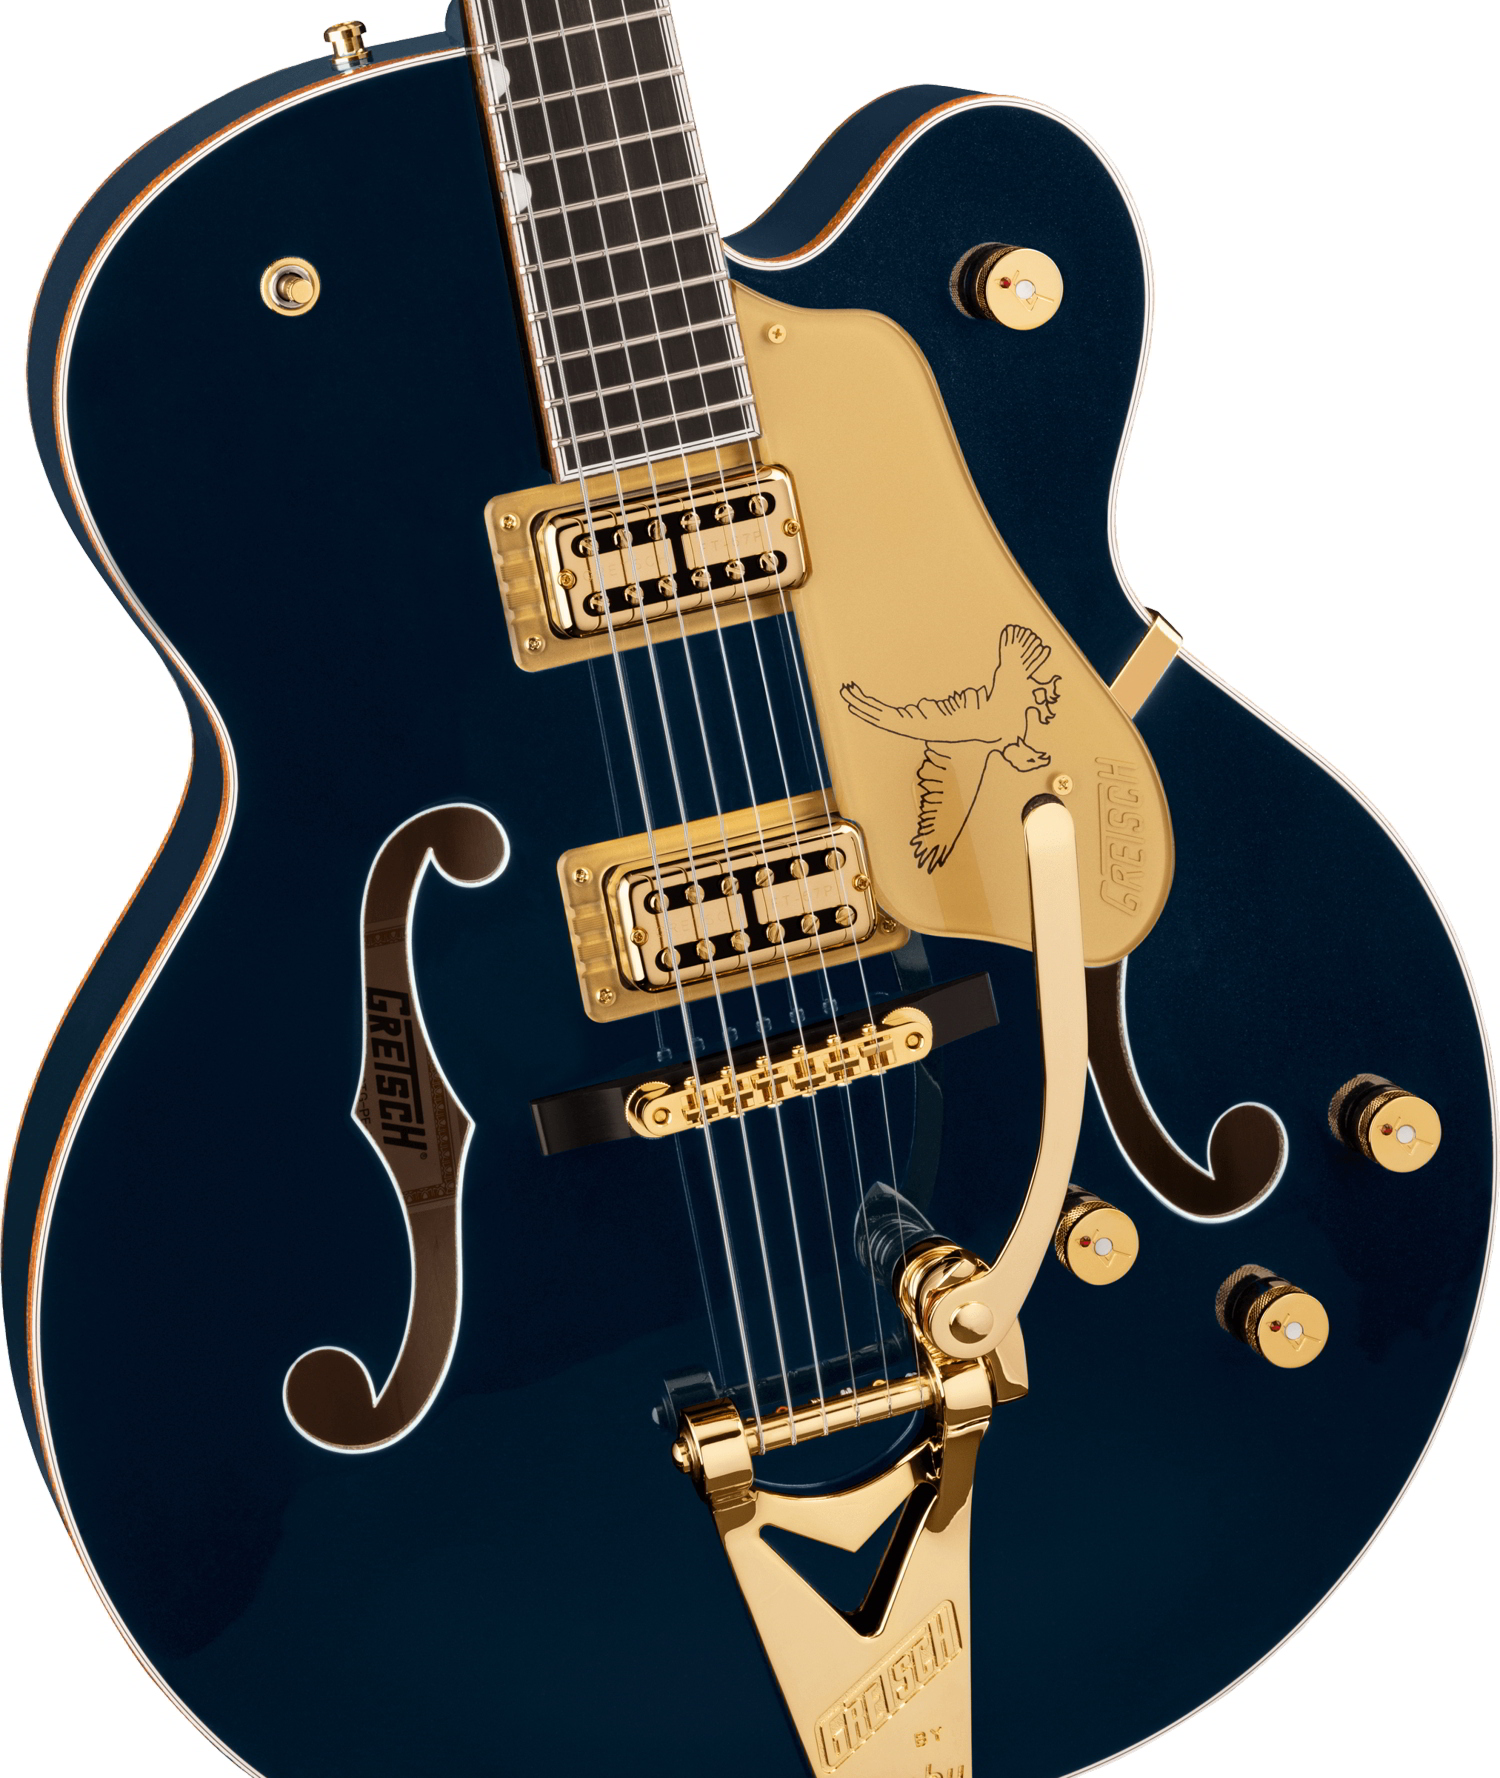 G6136TG Players Edition Falcon™ Hollow Body with String-Thru Bigsby® and Gold Hardware, Ebony Fingerboard, Midnight Sapphire追加画像